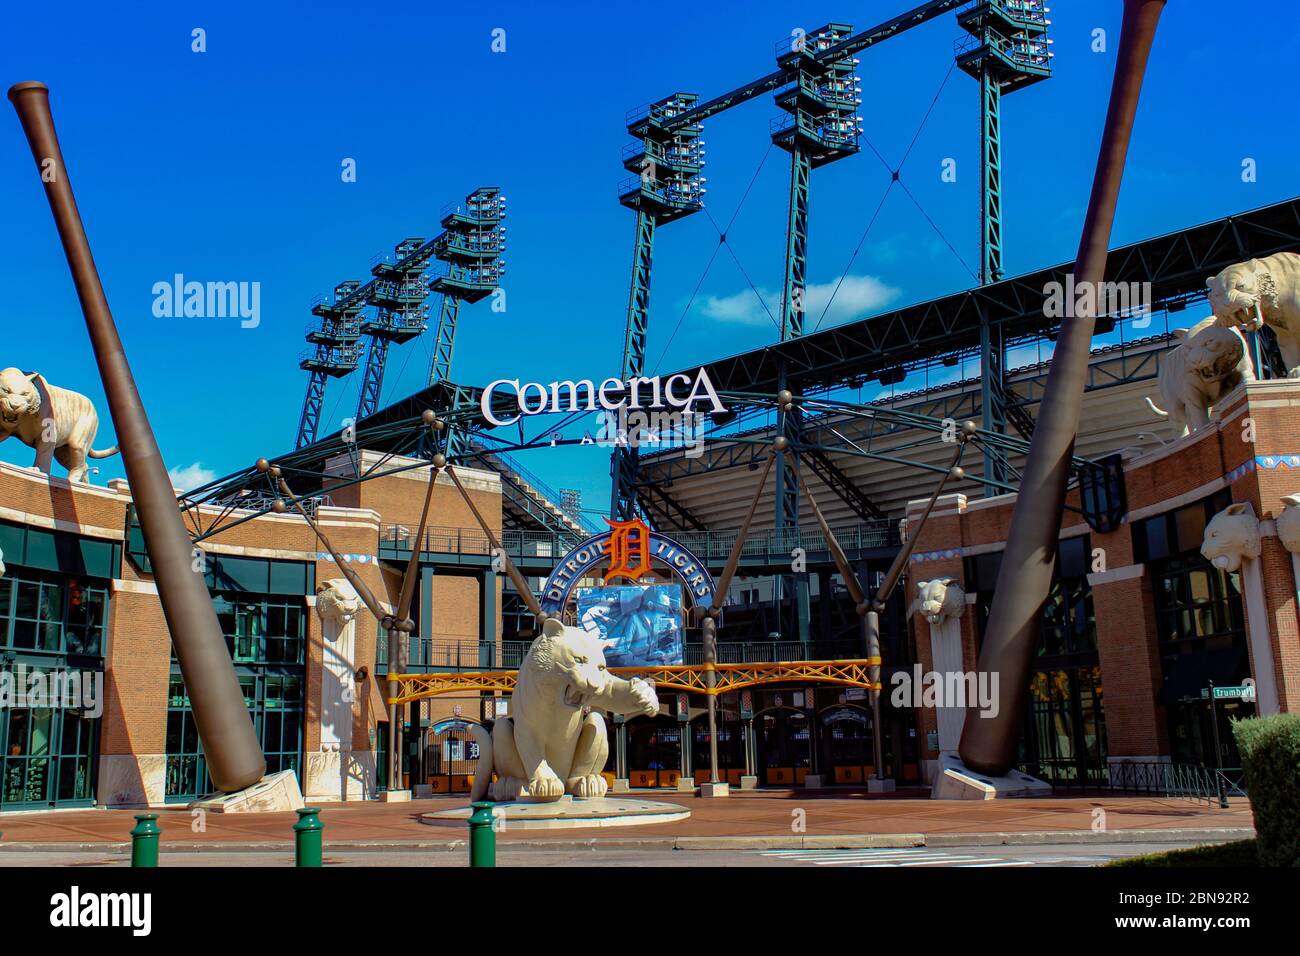 View of Comerica Park, home of the Detroit Tigers, on a sunny day Stock Photo